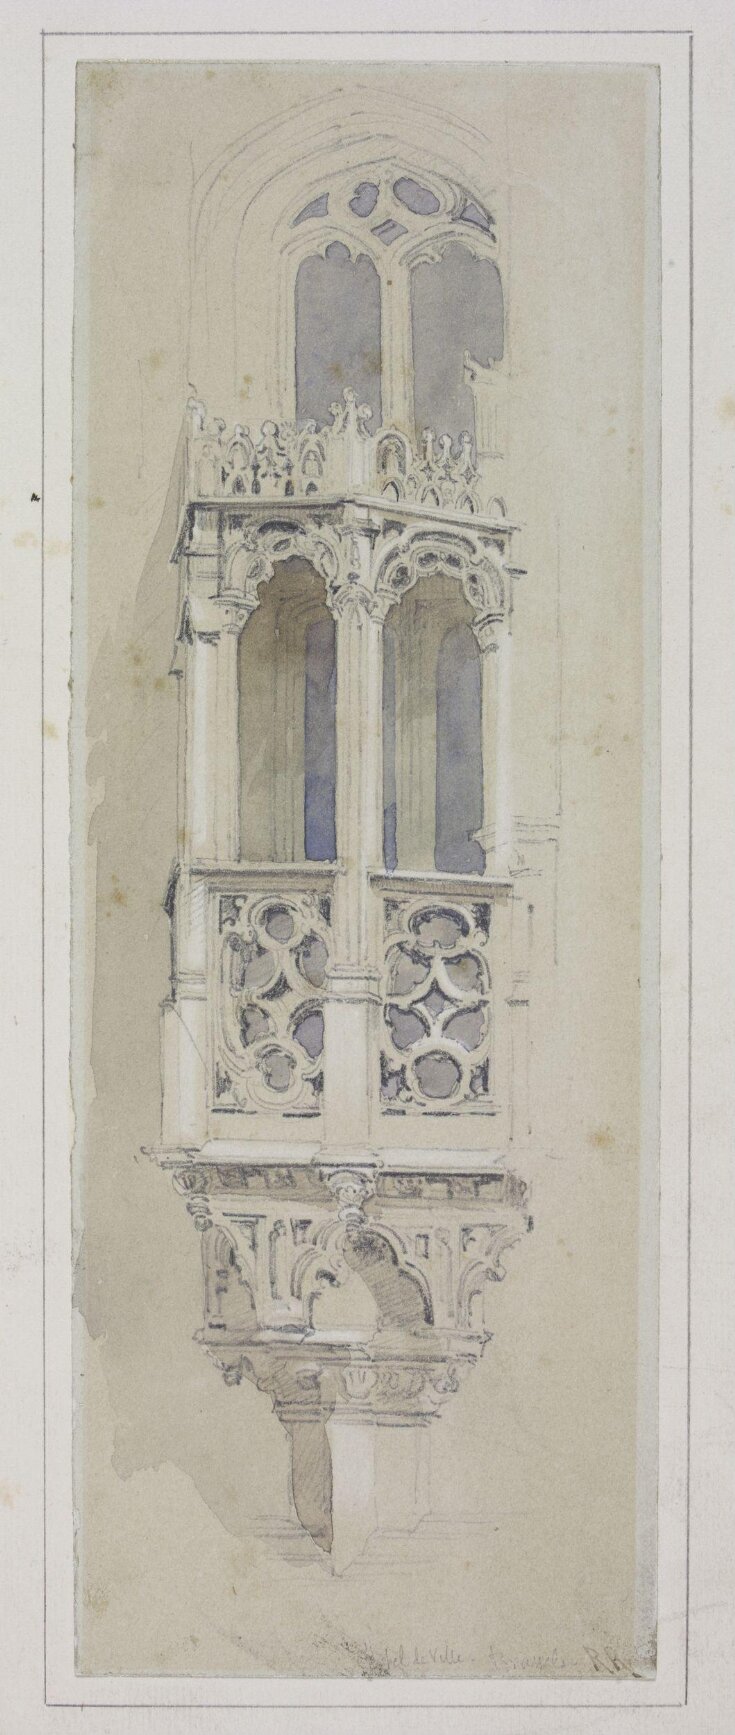 Sketch of a window and balcony, Hotel de Ville, Brussels top image